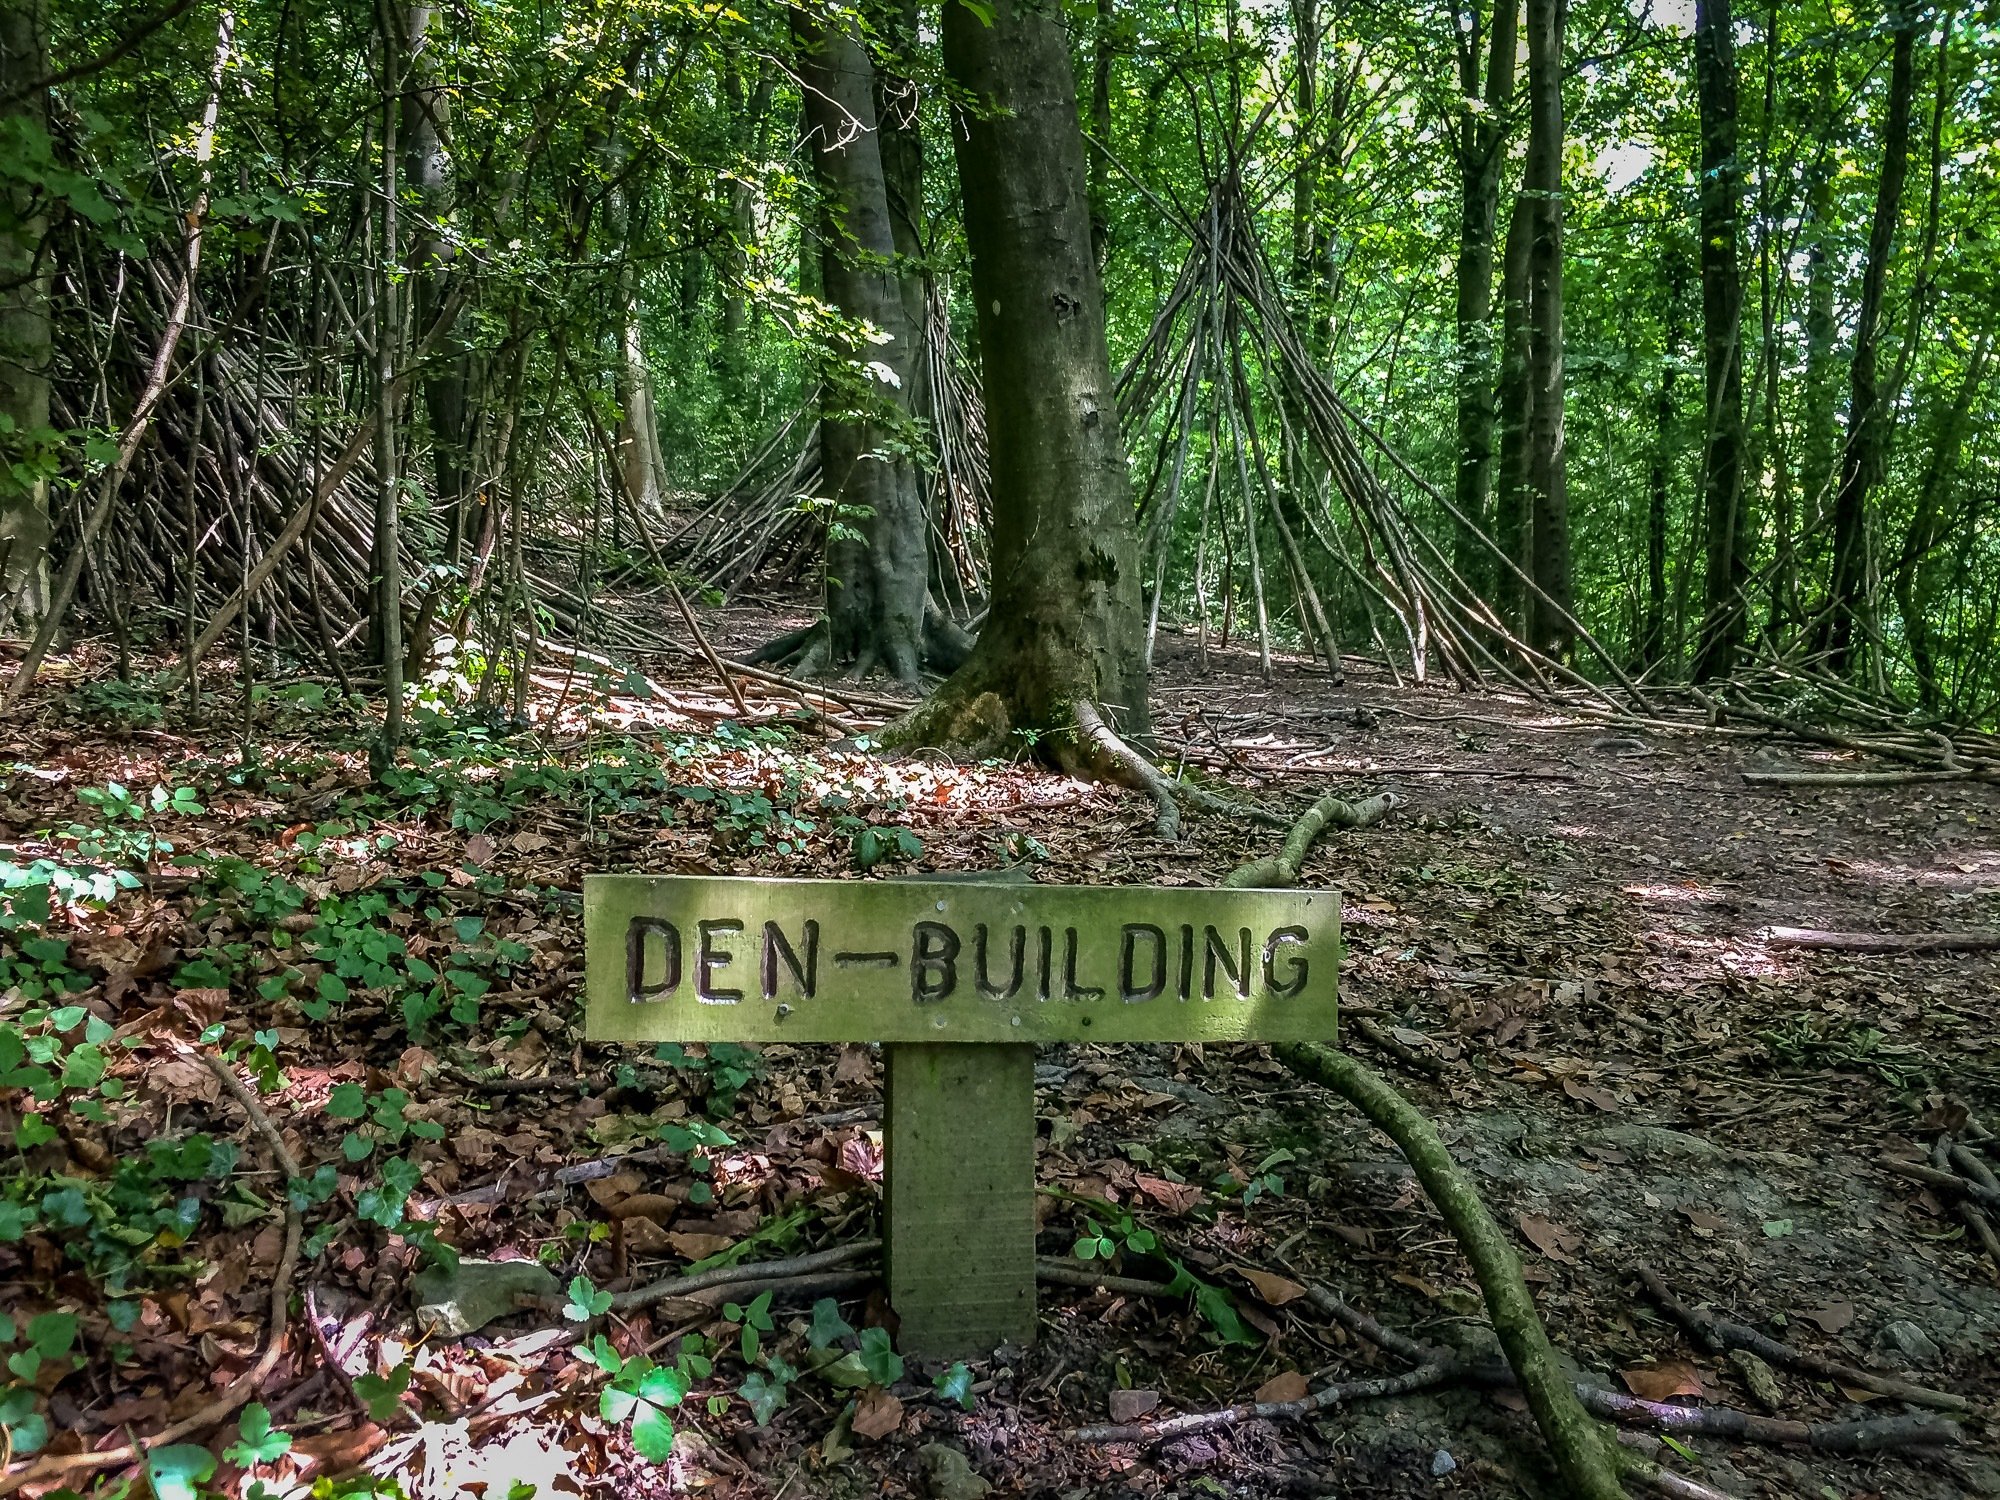 Den Building at the National Trust Wenlock Edge car park, just up from the campsite